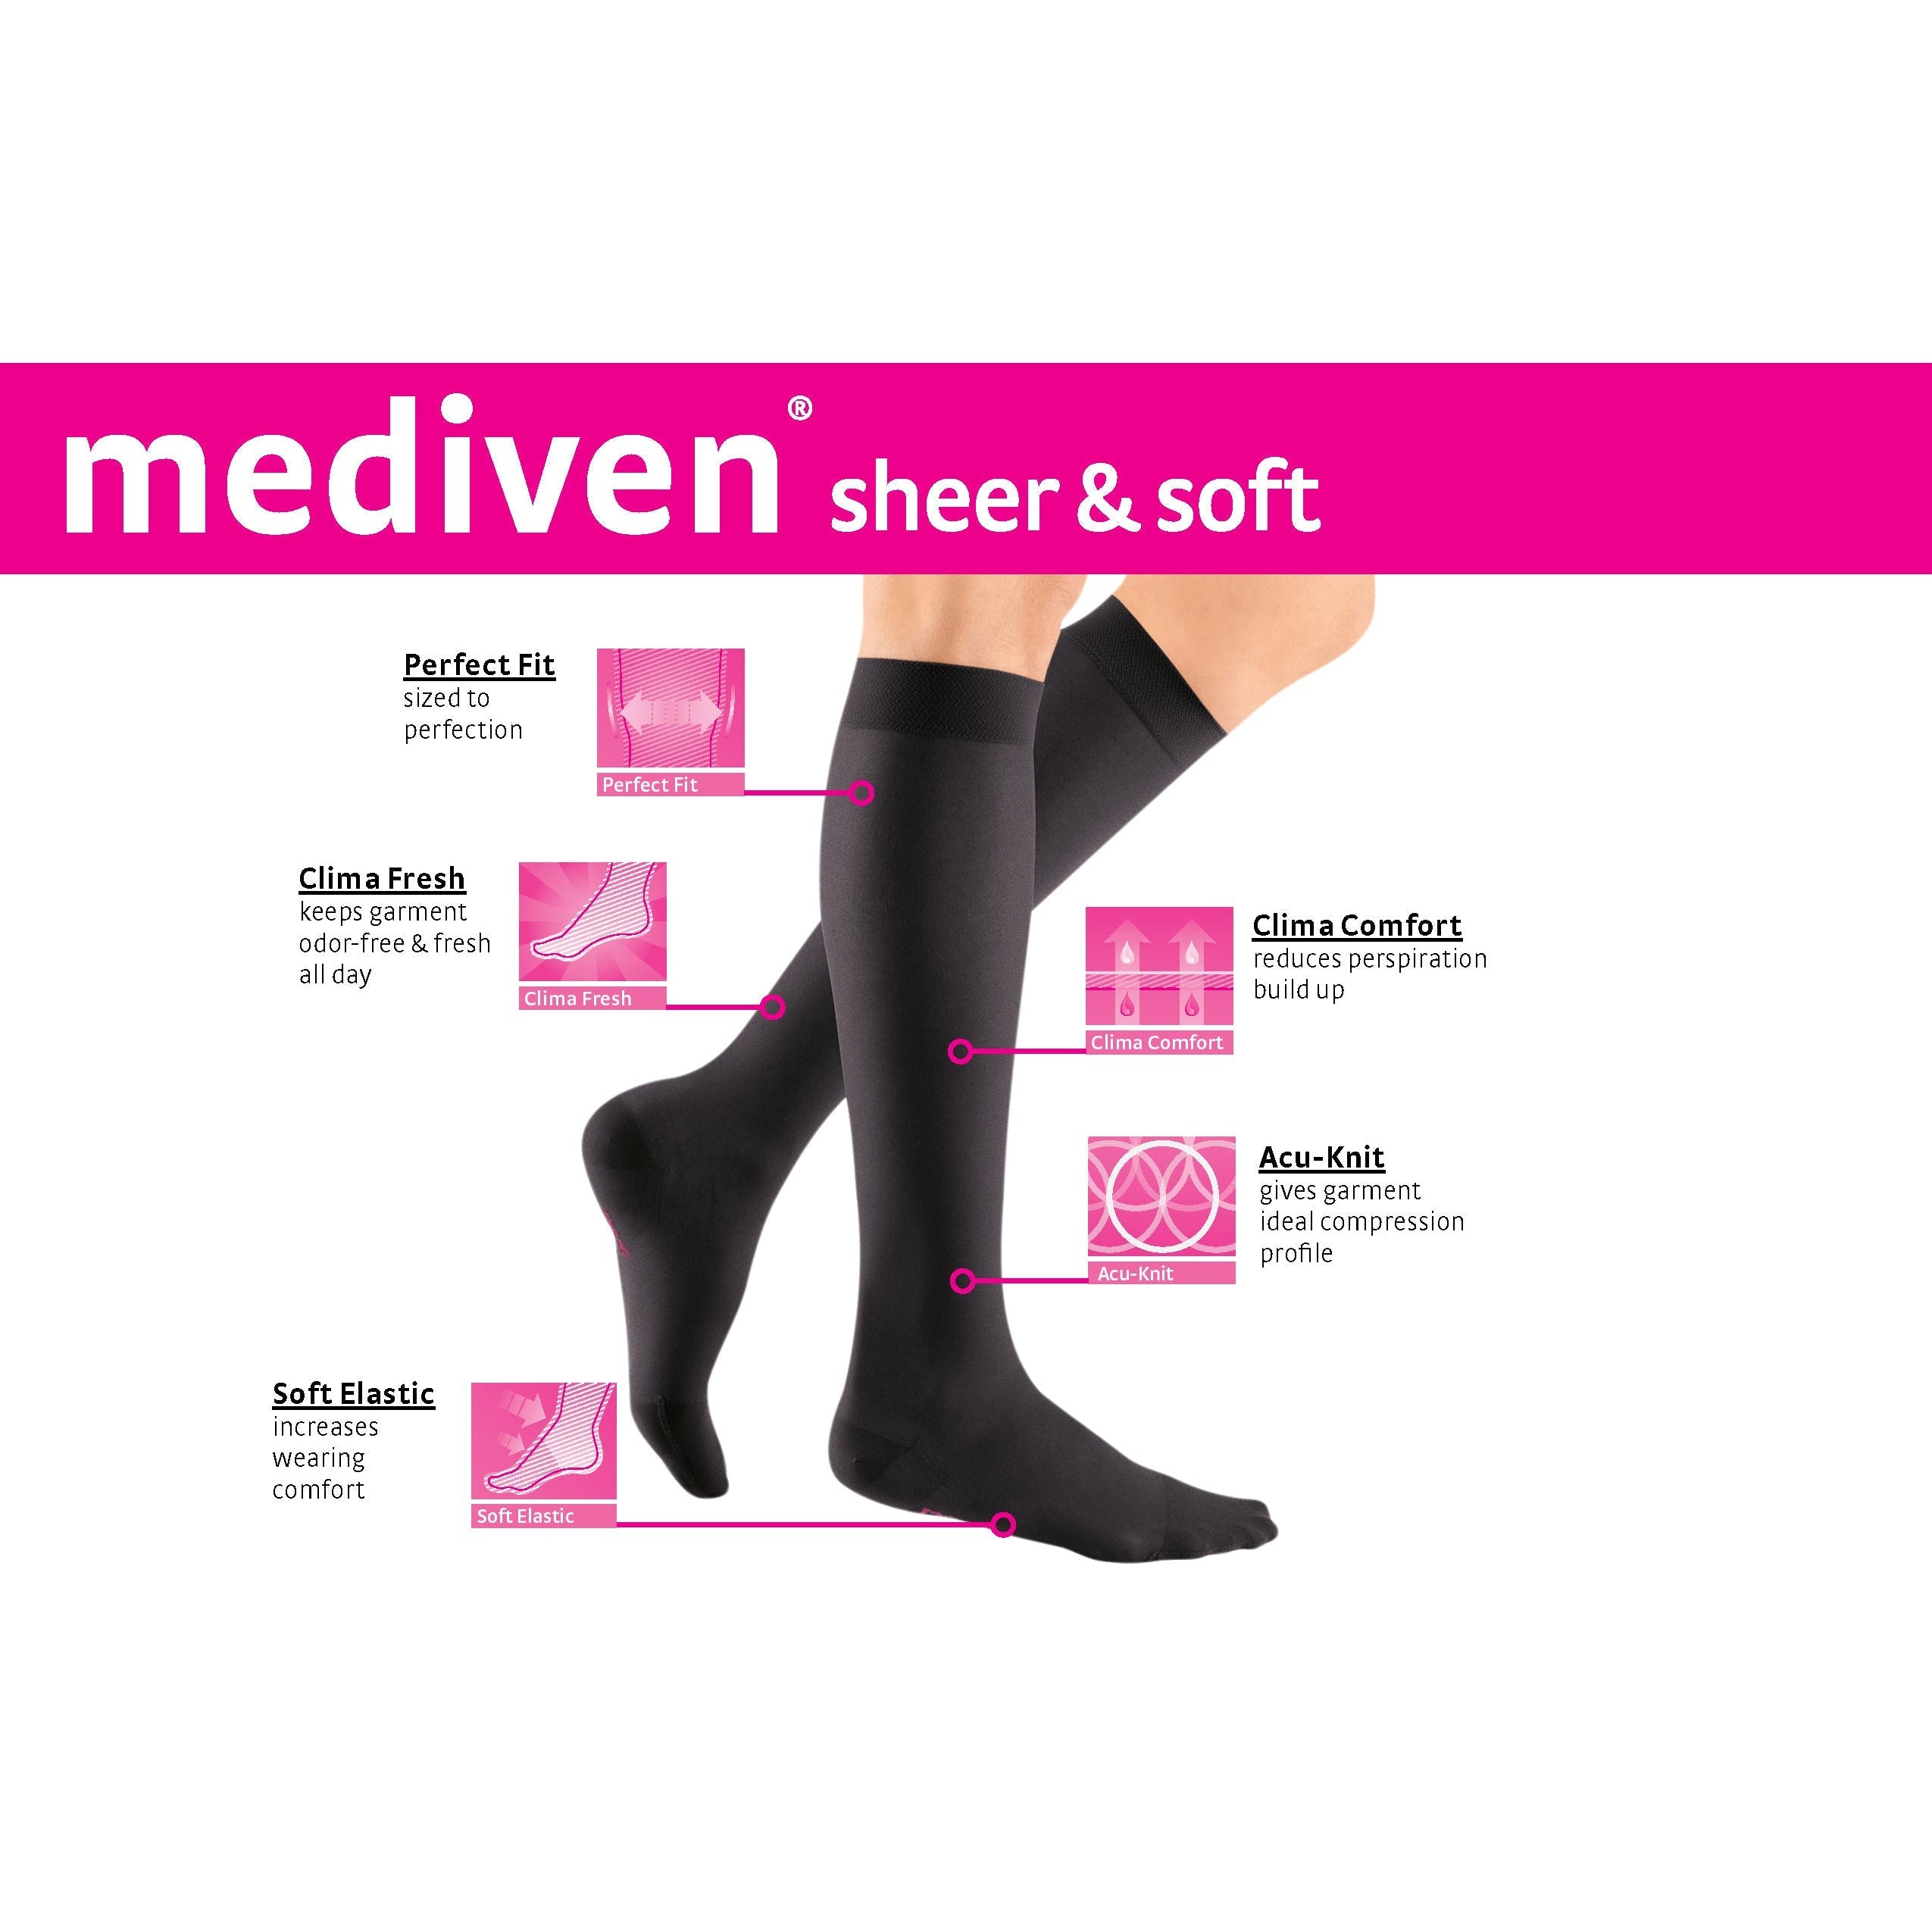 Compression socks DUOMED smooth thigh-length stocking with open toes, Upper thigh-length stockings, Compression stockings, Medical compression  stockings and sleeves